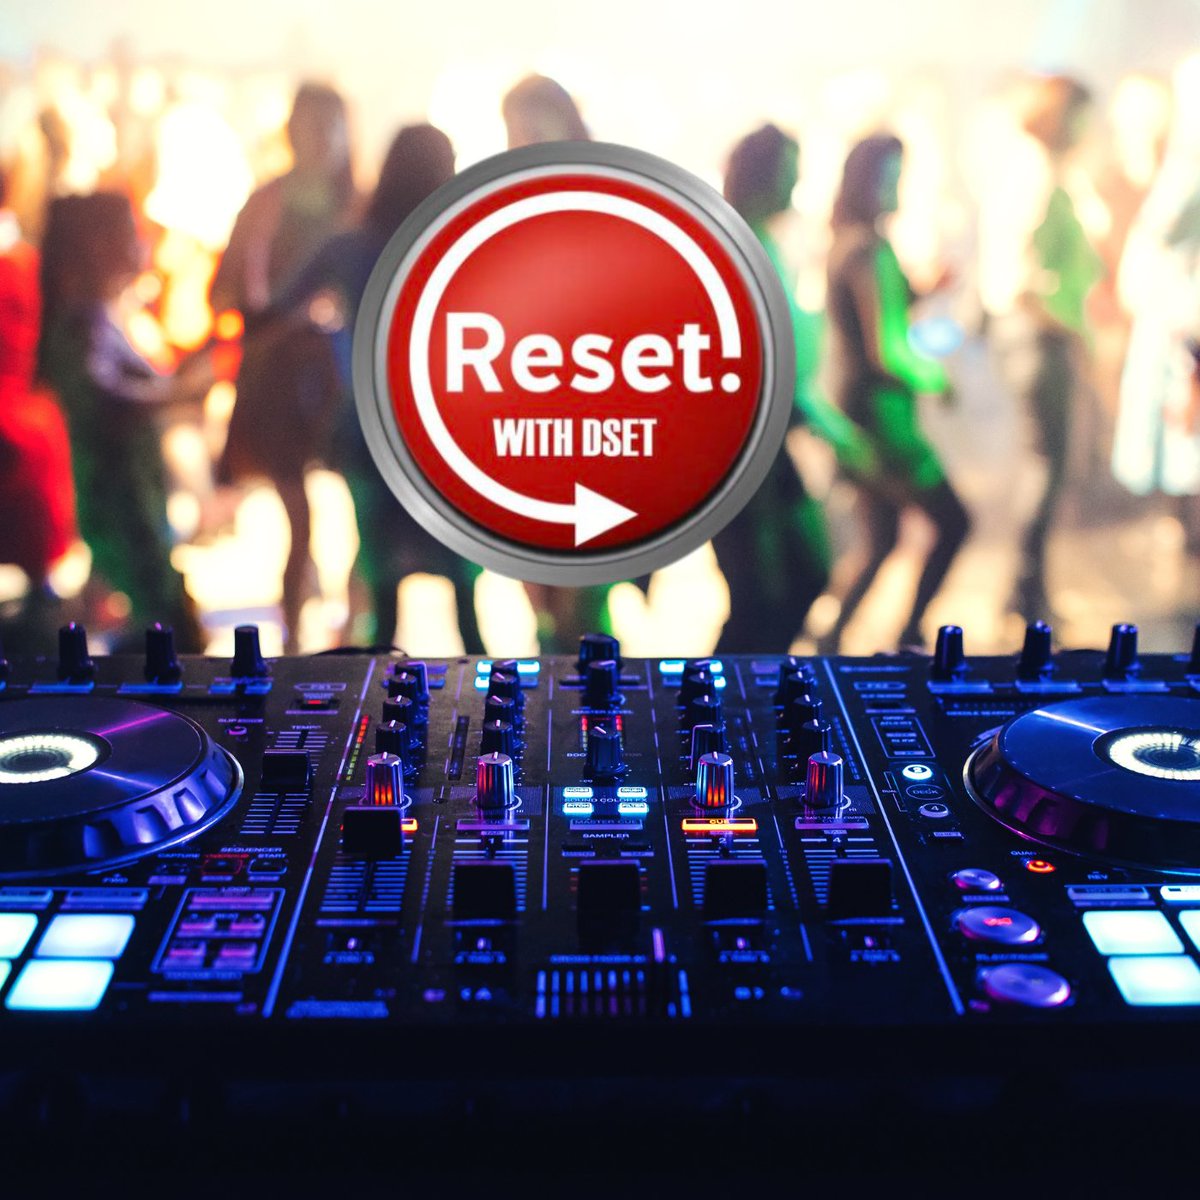 Attention all 80s and 90s music lovers!

Are you feeling nostalgic for the days of big hair, neon clothes, and awesome music? Then you need to tune in to Reset With DSET, your one-stop shop for all things old school.
mbradio.us/reset-with-dse…
#throwback
#oldschoolmusic